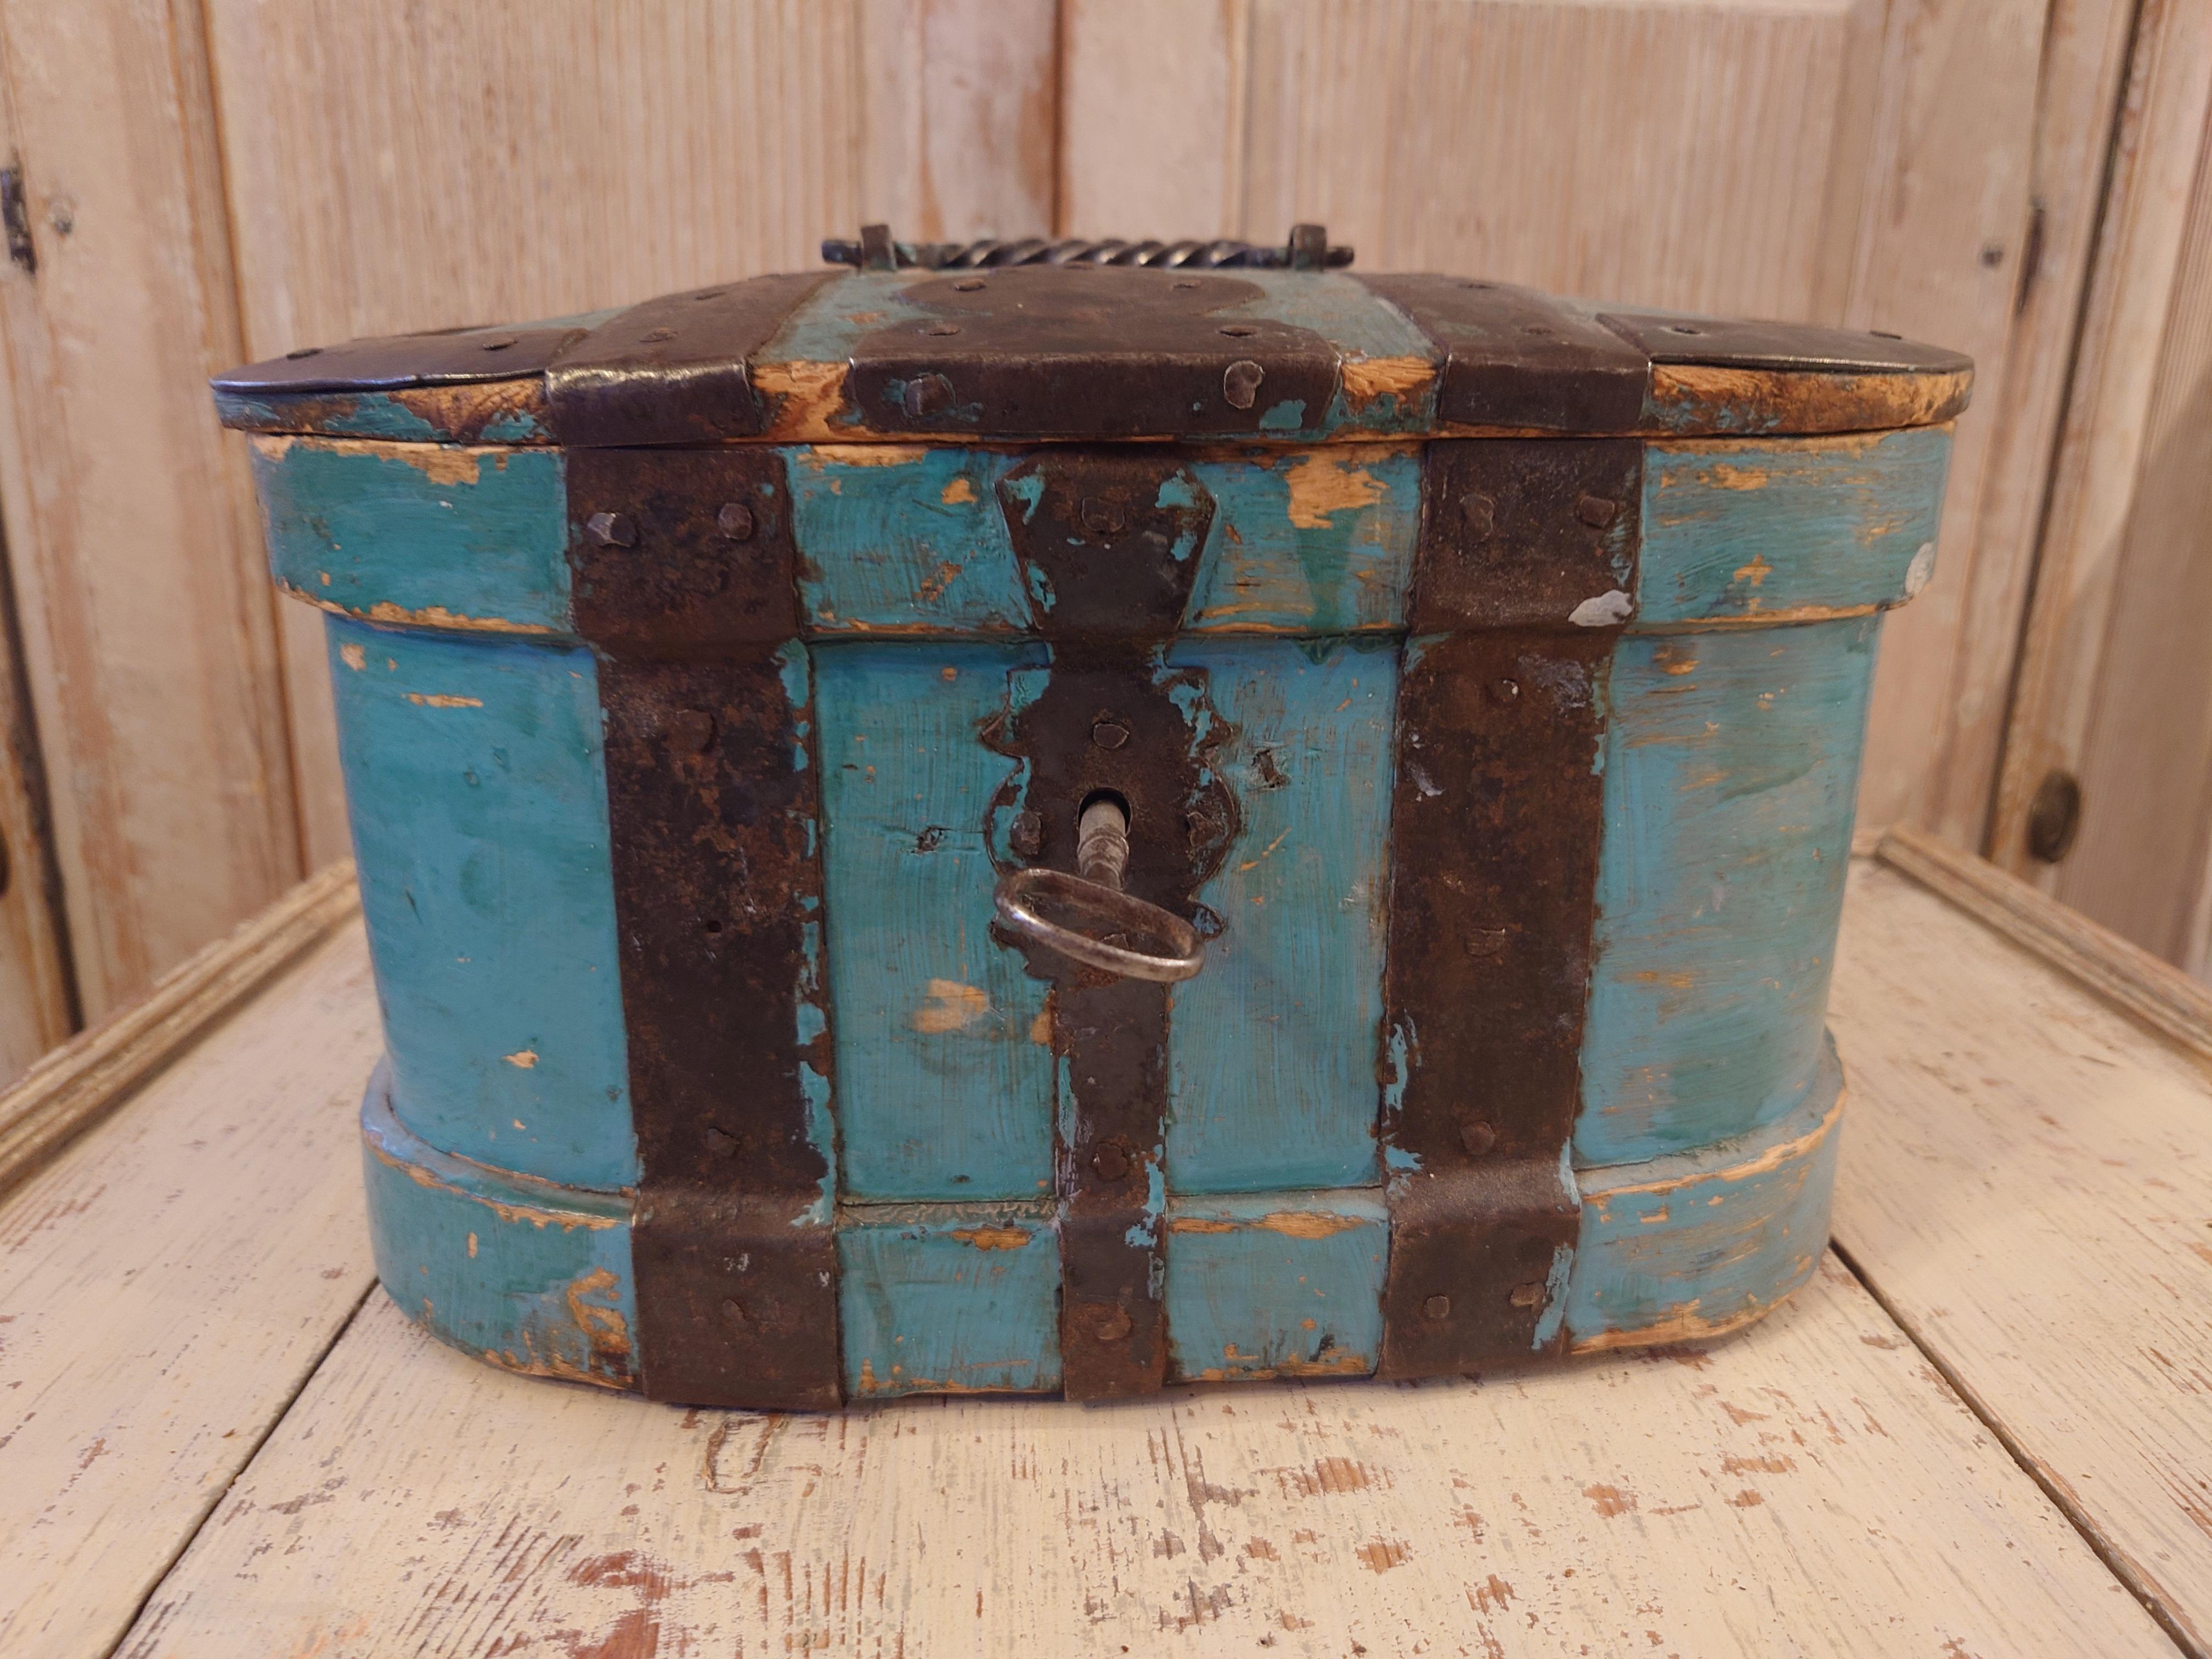 Mid 19th Century Swedish Folk Art Travel box from Skellefteå Västerbotten, Northern Sweden.
Beautiful untouched original paint.
Dated 1858
Decorated with handwrought iron around the box and over the lid.
Working lock and key.
The box was used to